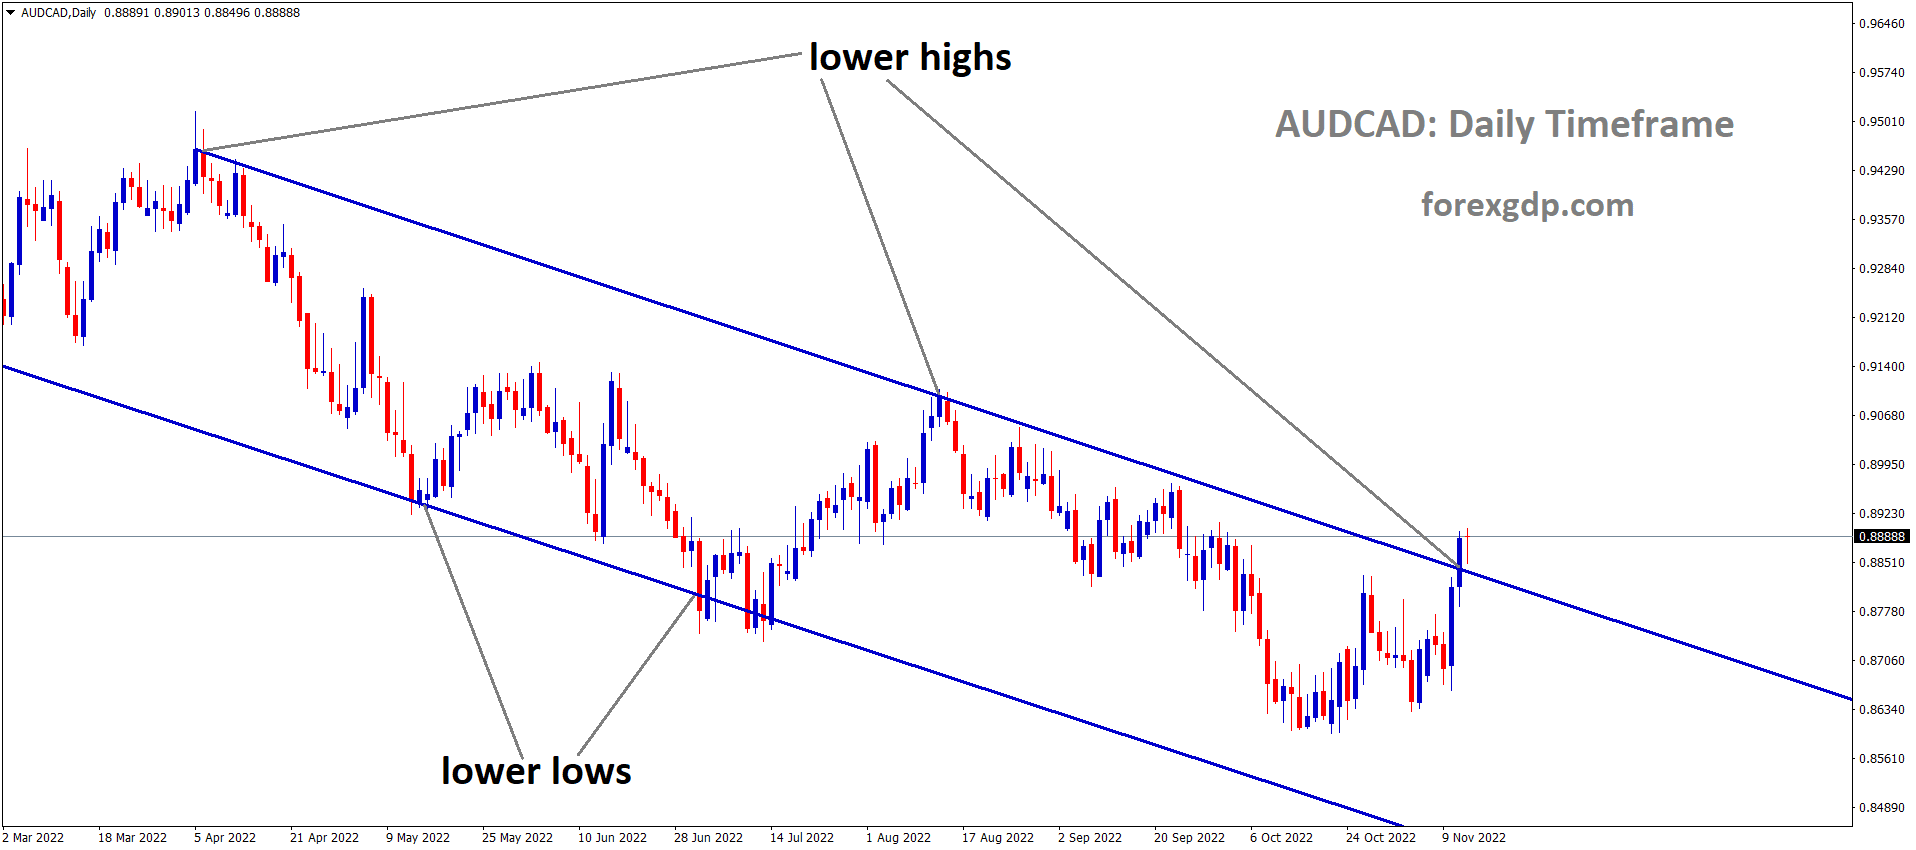 AUDCAD is moving in the Descending channel and the market has reached the lower high area of the channel 6